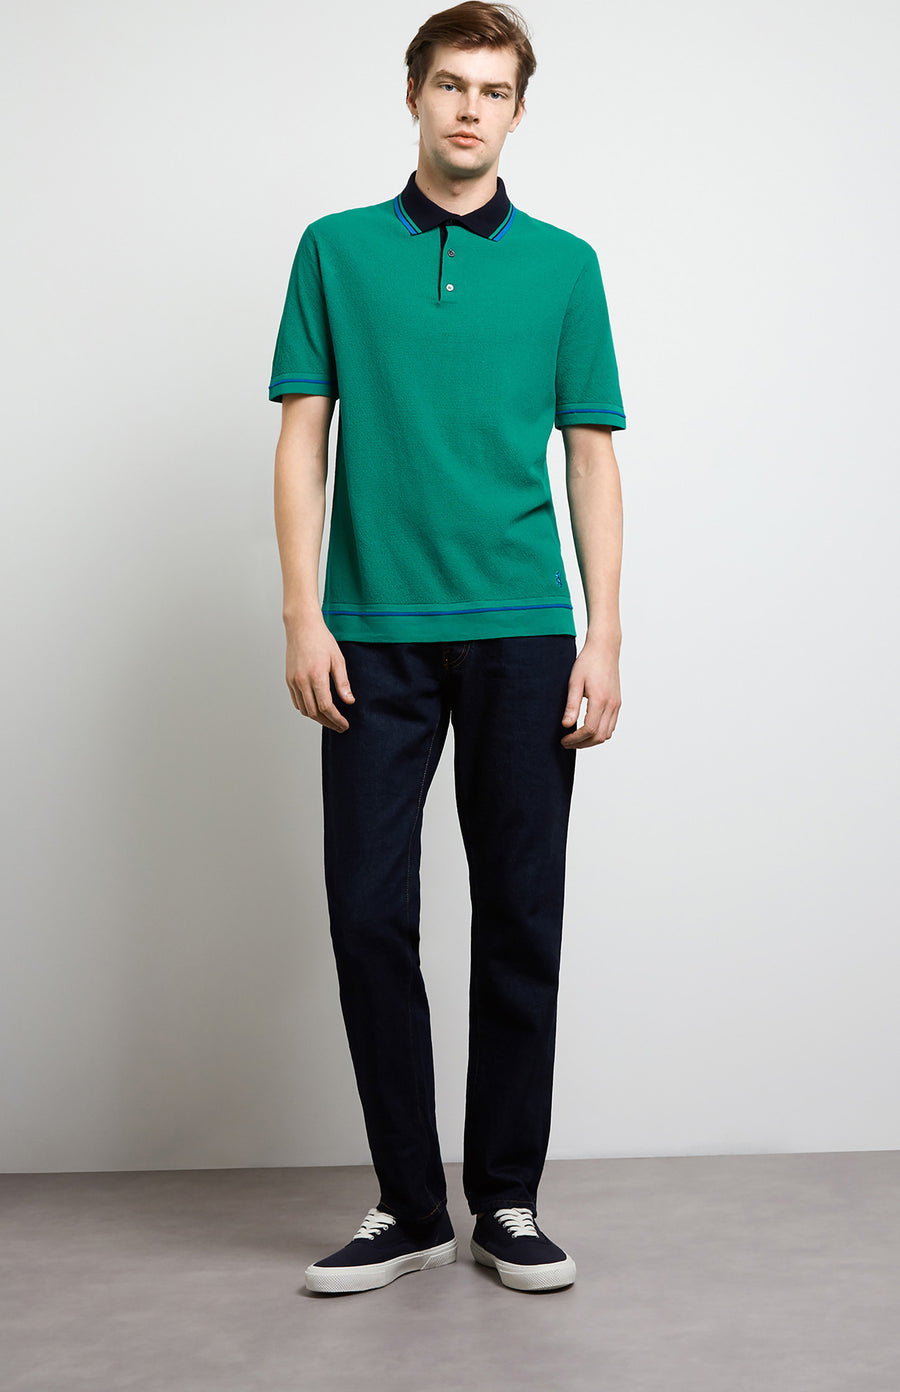 Contrast Tipped Cotton Polo Shirt In Grass/Cobalt